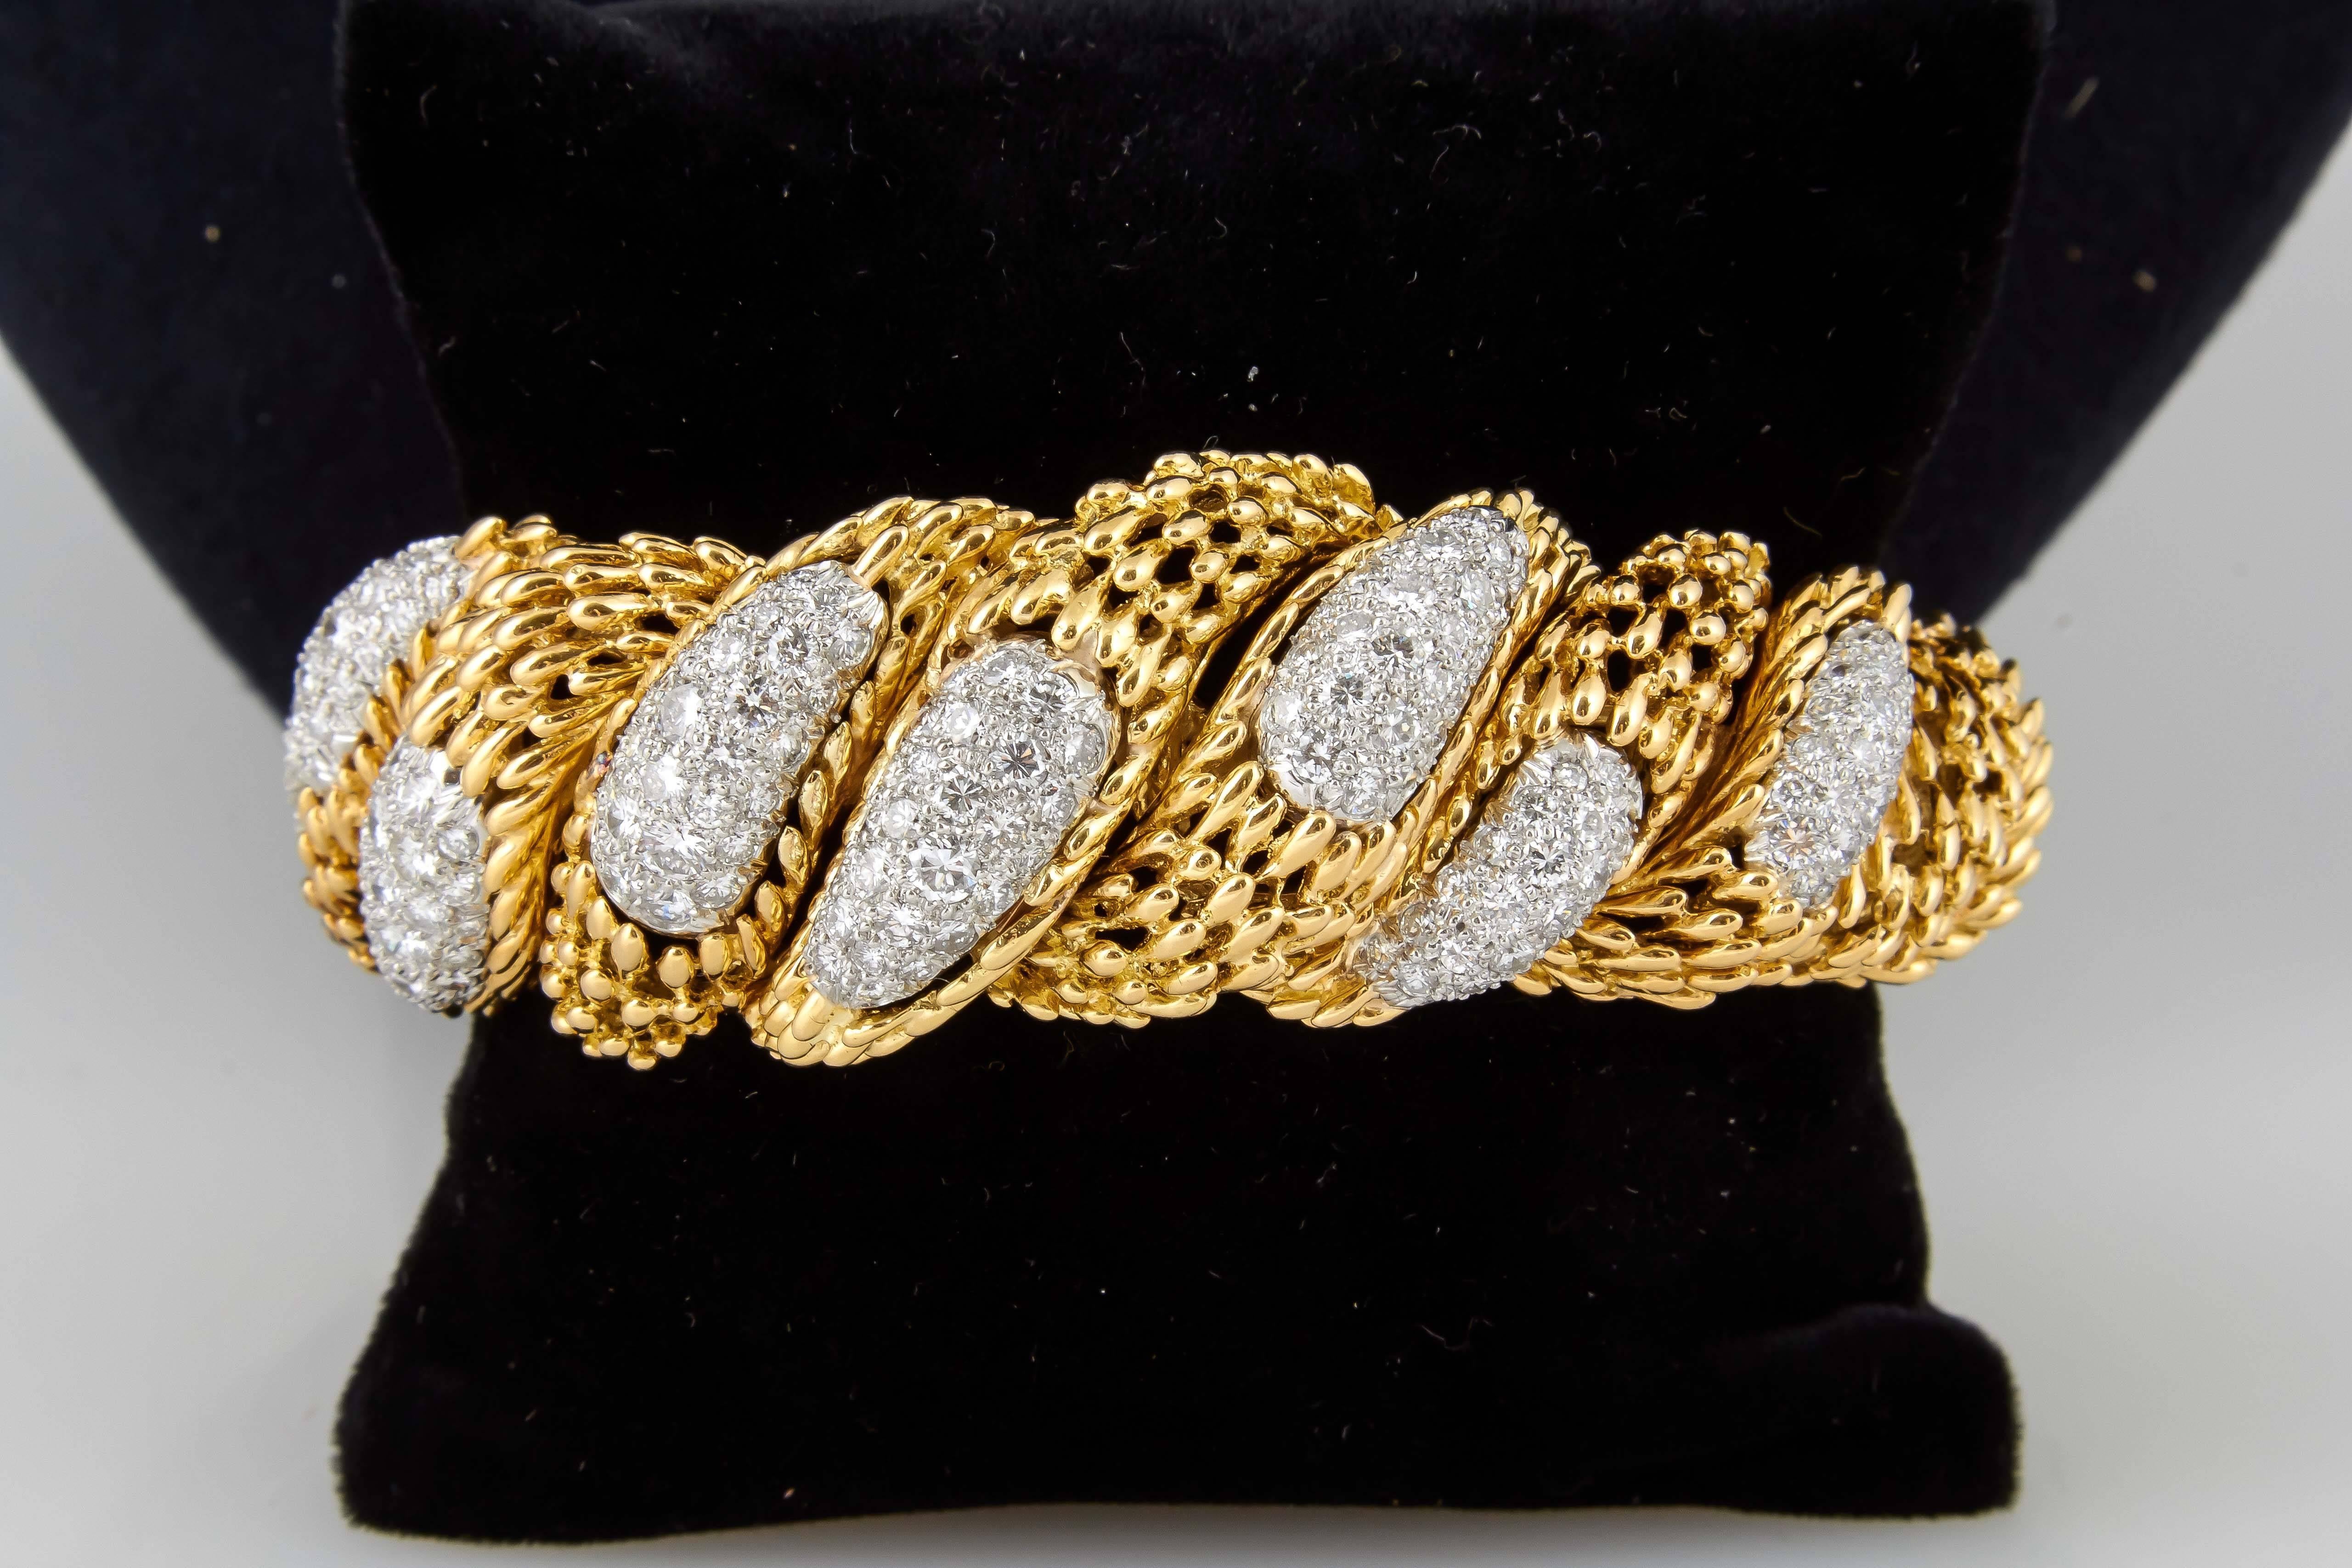 Beautiful bracelet finely crafted in 18k yellow gold with diamonds weighing approx. 11.00 carats signed by Hammerman Brothers.